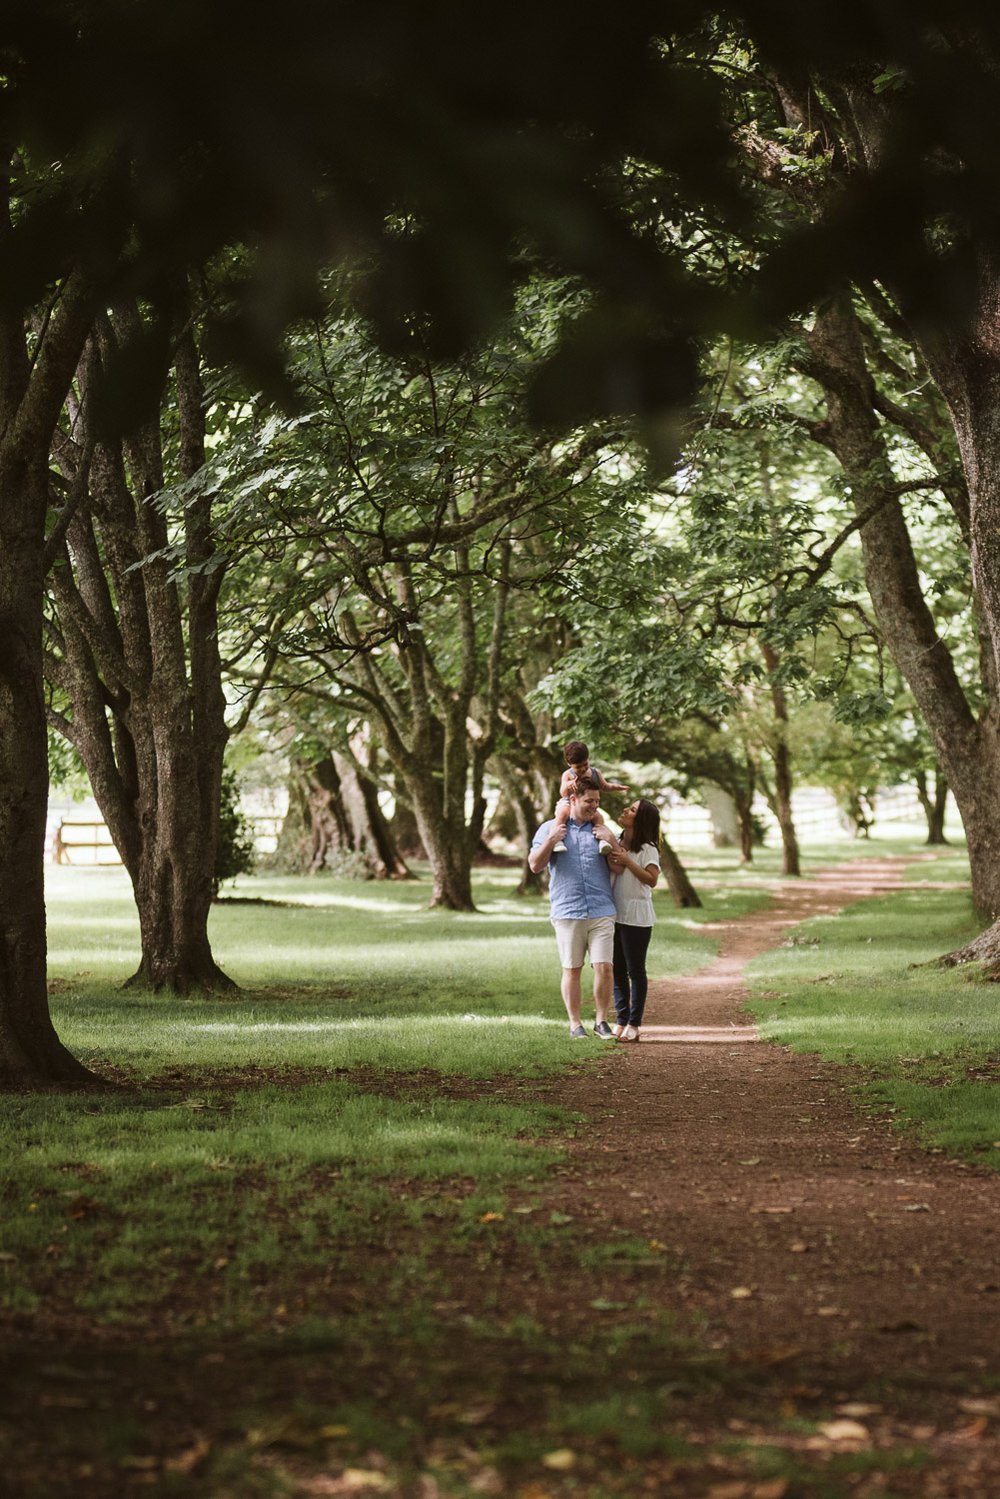 Family Photo Shoot Locations in Auckland - Cornwall Park trees_.jpg